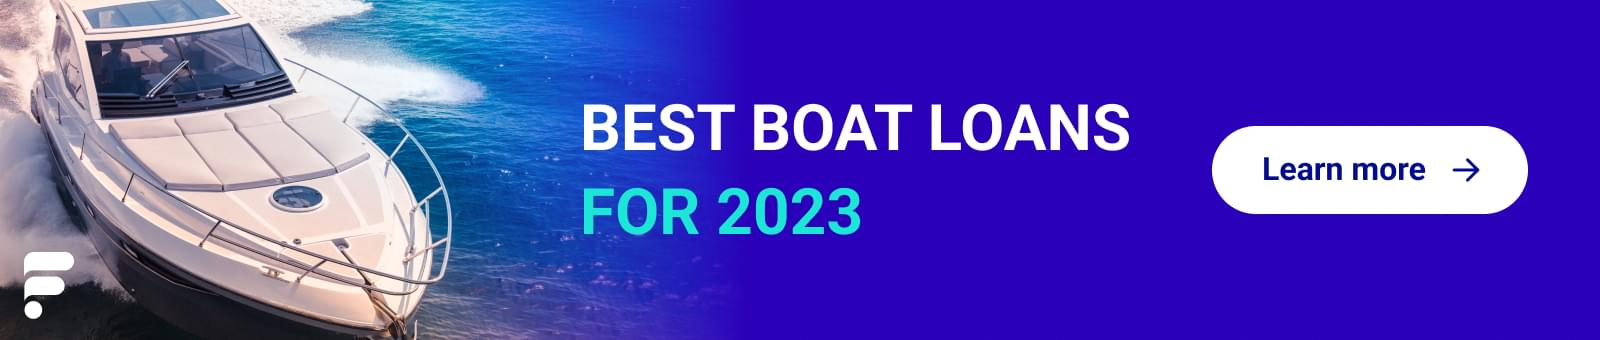 Best boat loans Ranked & Reviewed